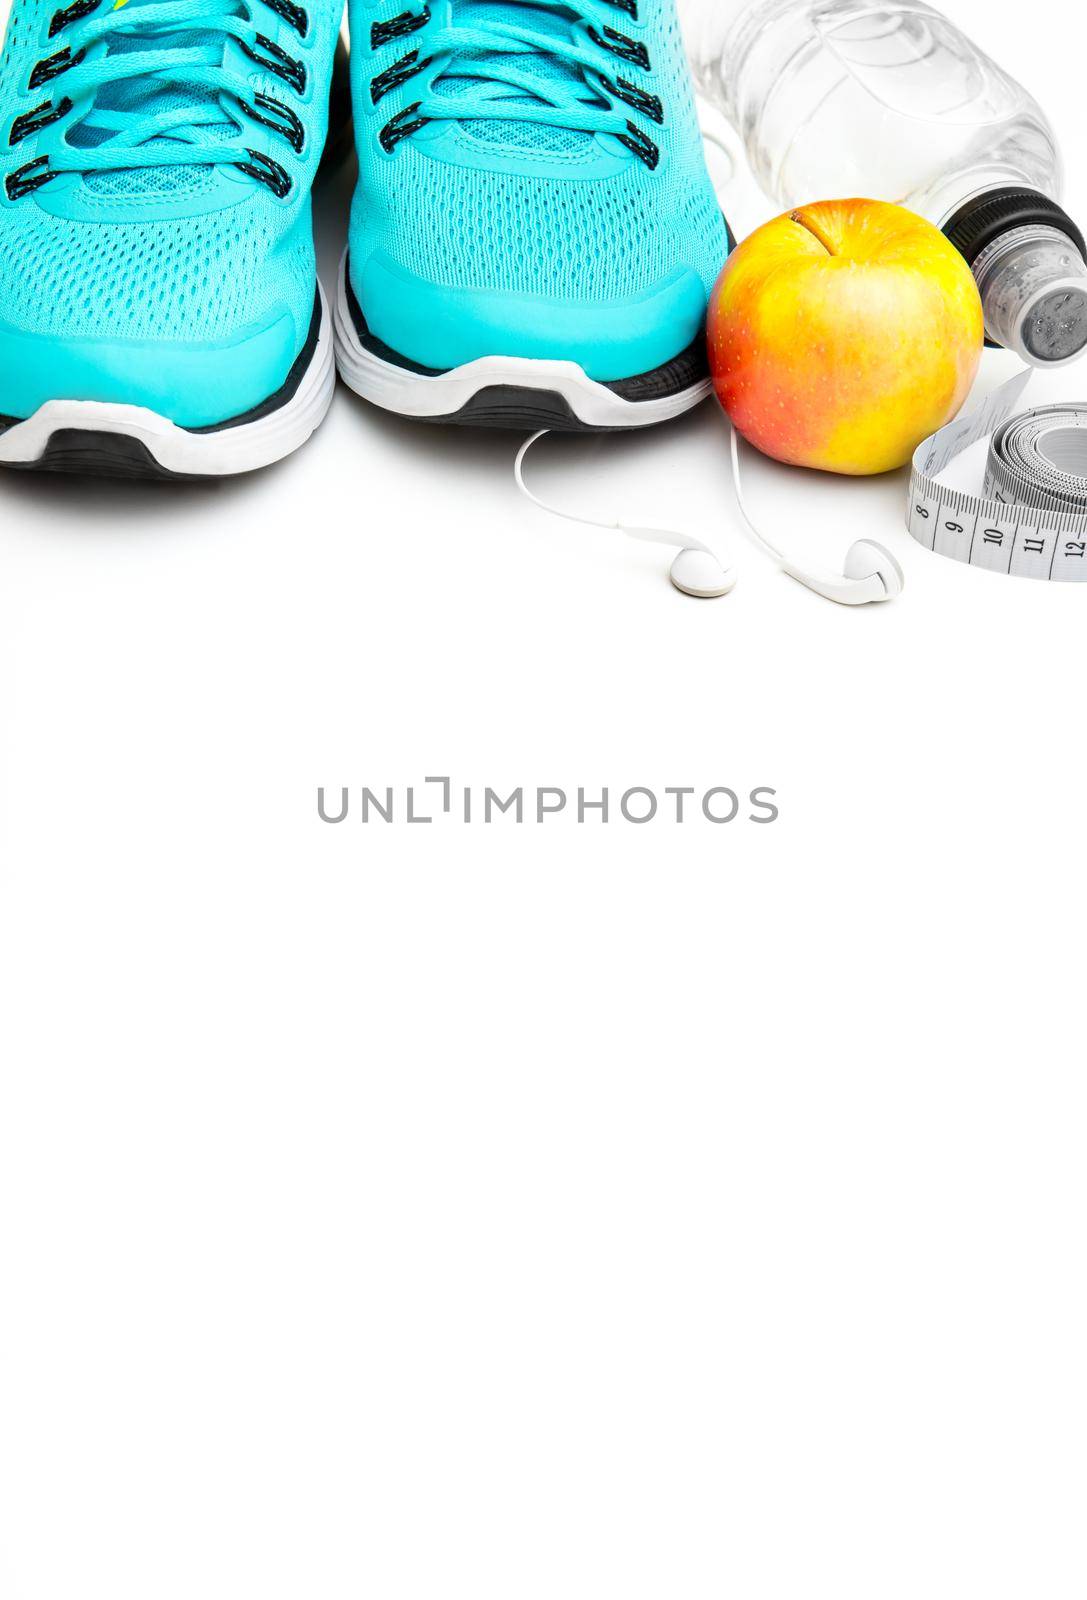 sport background: blue running shoes and apple with objects isolated on white background